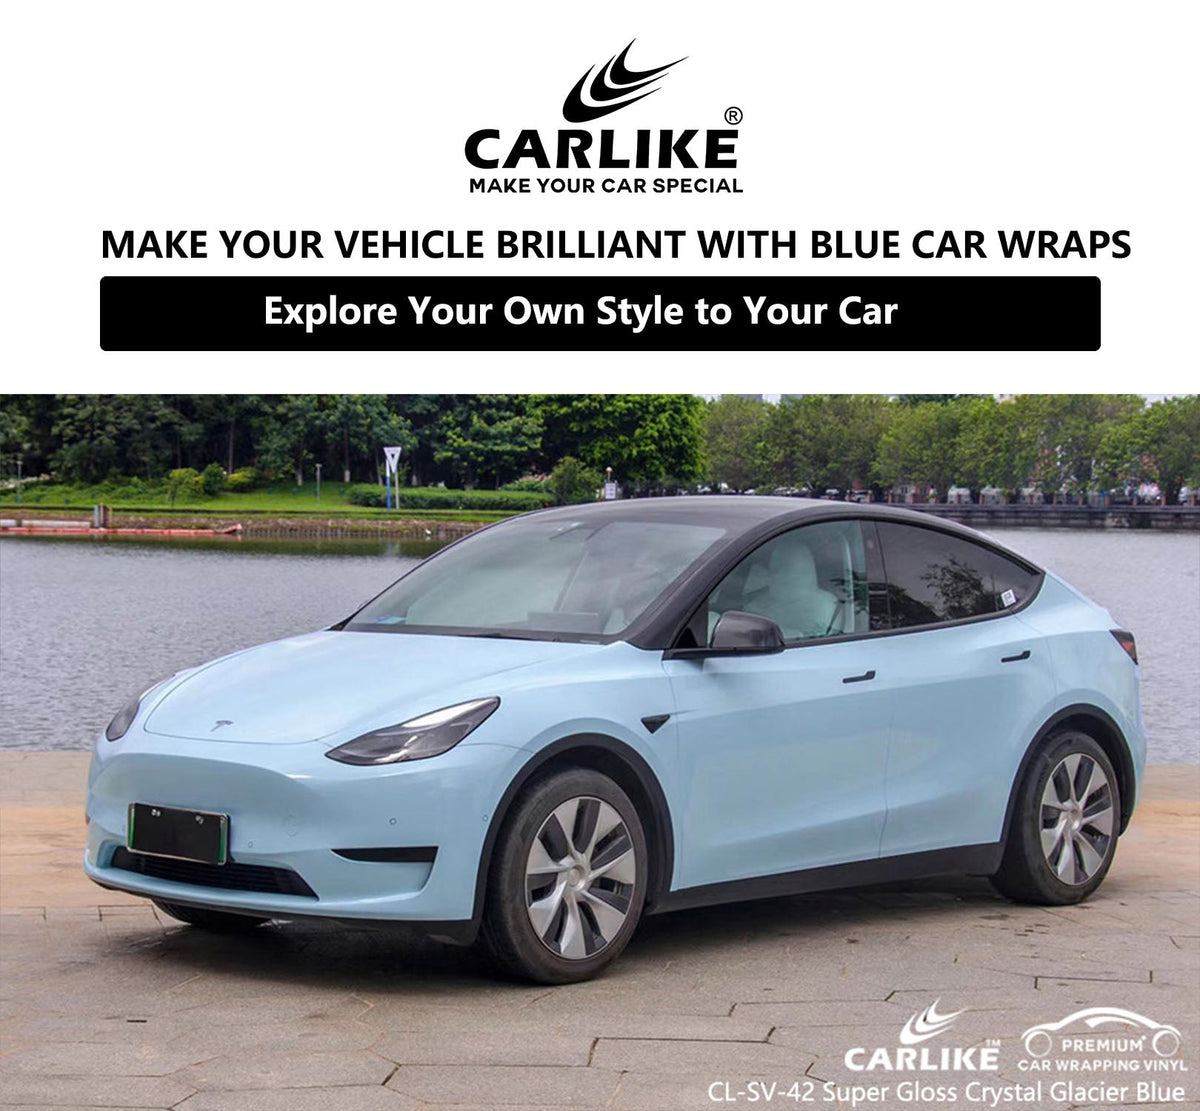 Blue Car Wraps: Your Ticket to a Showstopping Ride for Car